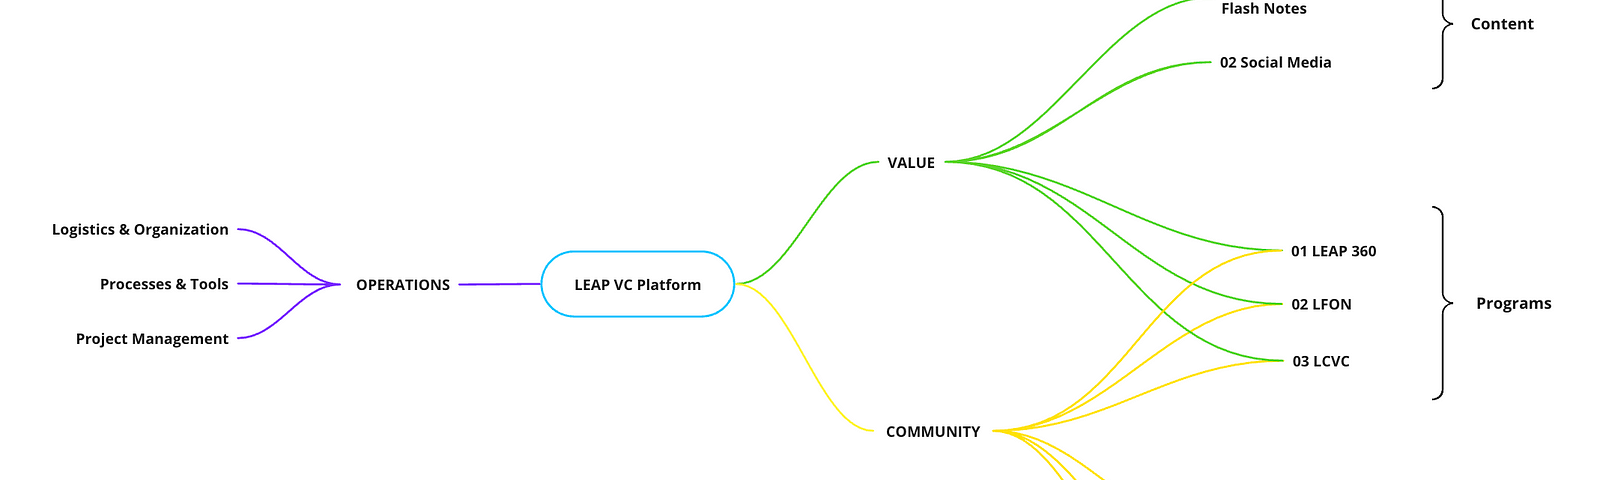 Mapping out LEAP’s platform strategy